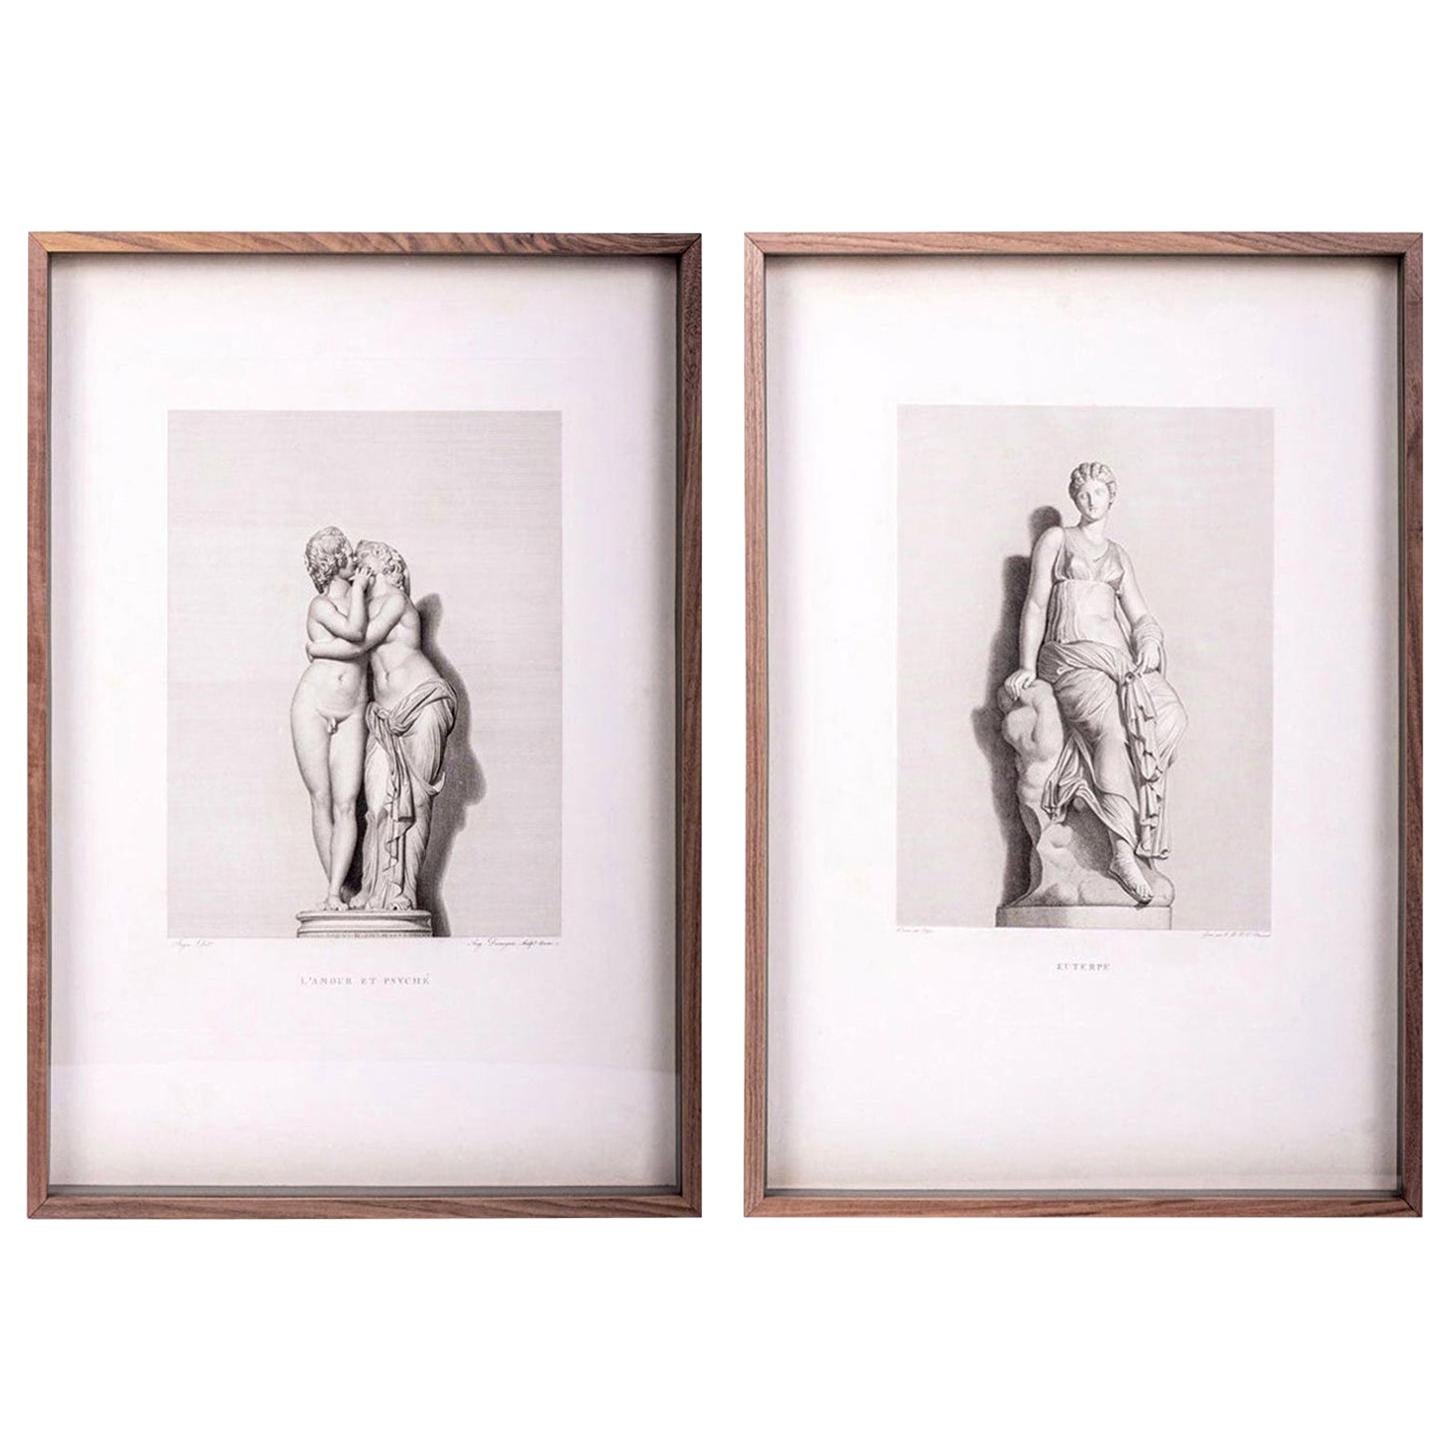 Large Framed 19th Century Engravings of Classical Figures 1